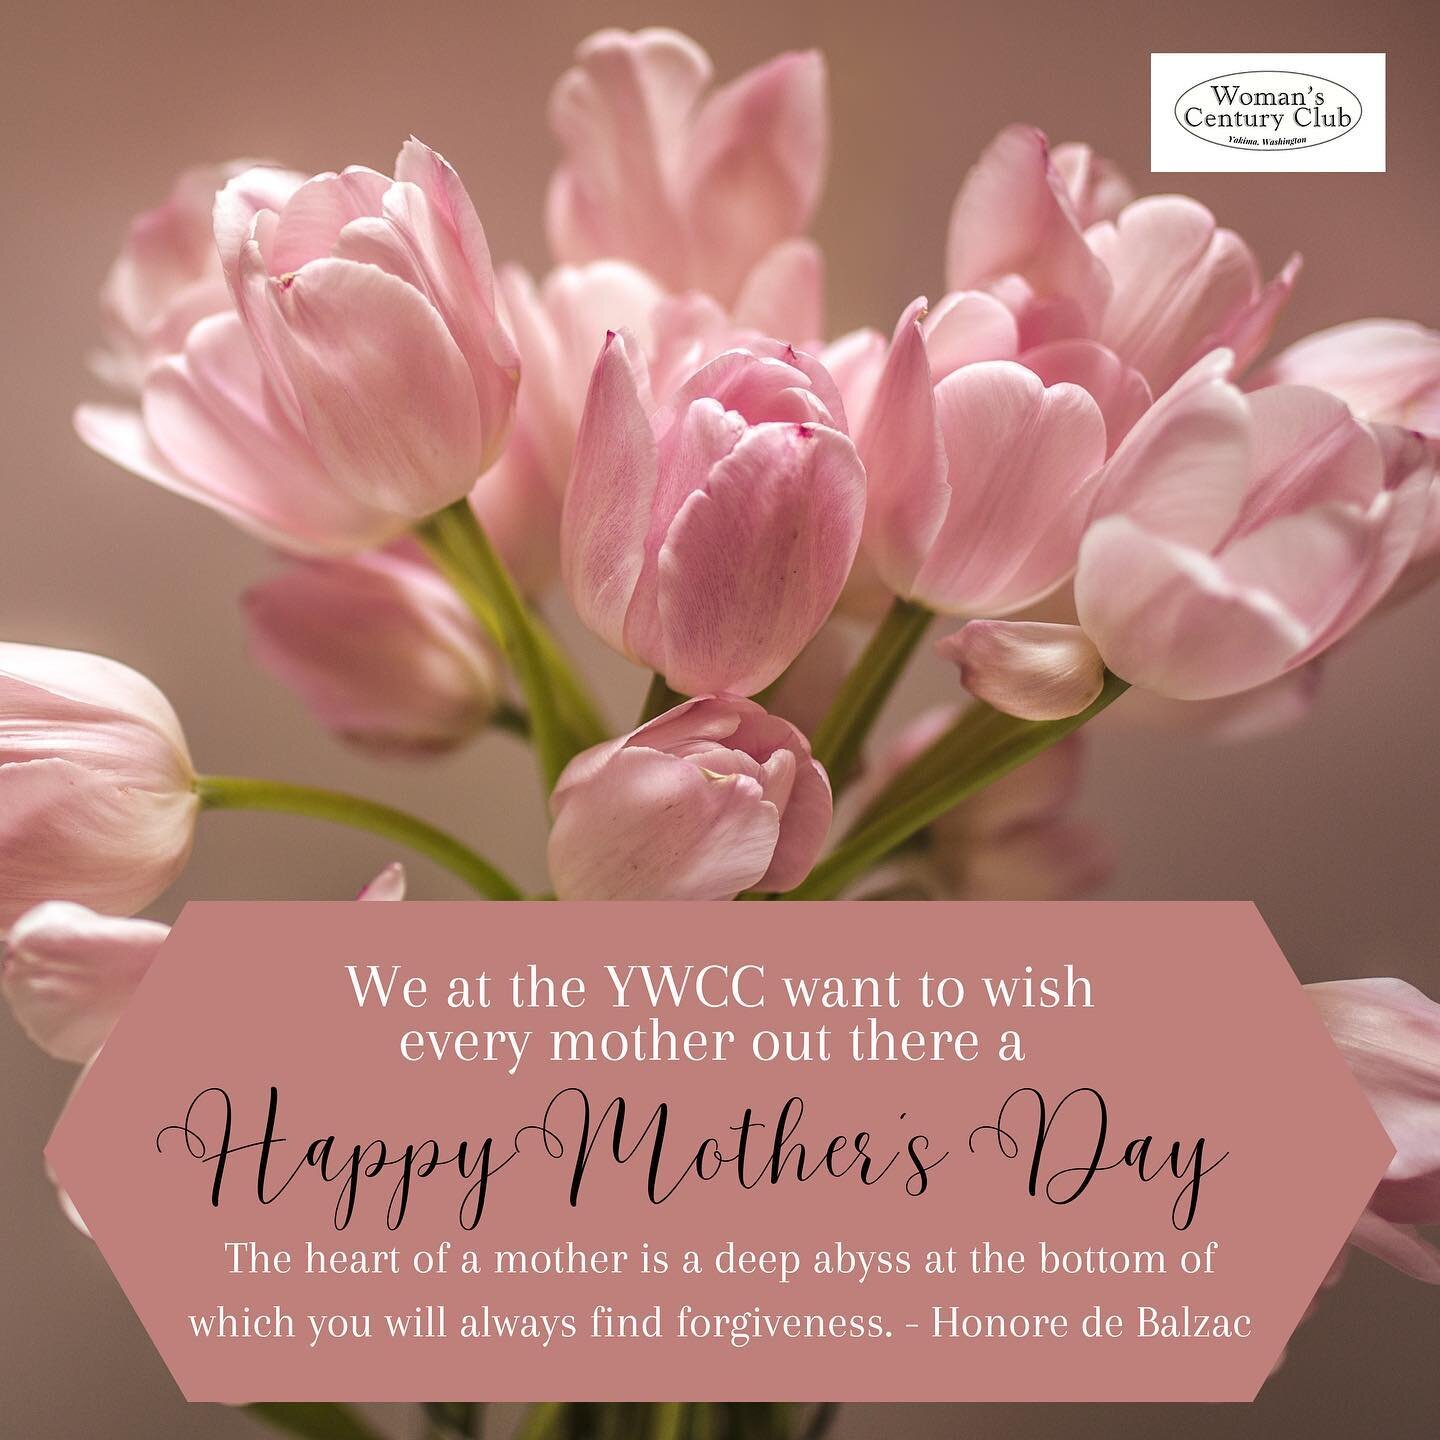 A mother's love is as big as the sky and as deep as the ocean.

Dear Mothers, 
We want to take this time to appreciate you and all you do for everyone in your life. Without you the world would stop turning (not literally but maybe 😊!) We hope you ta